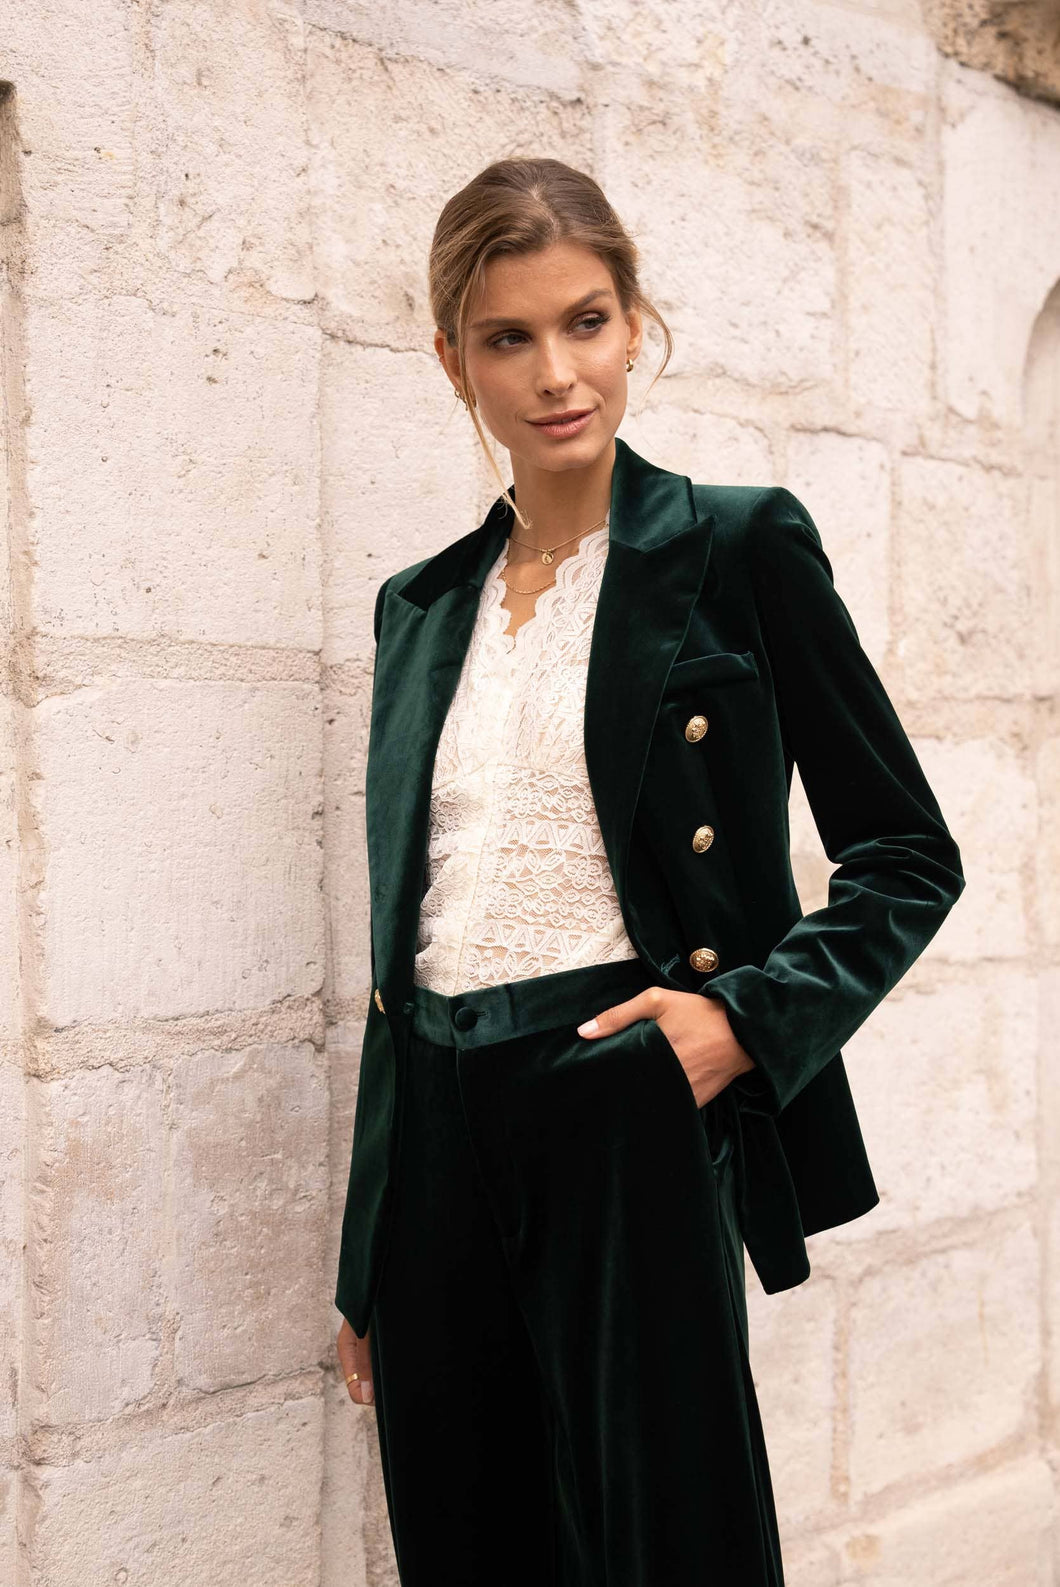 Double-breasted velvet blazer jacket with gold buttons - V1721N: 1S-1M-1L-1XL / Green